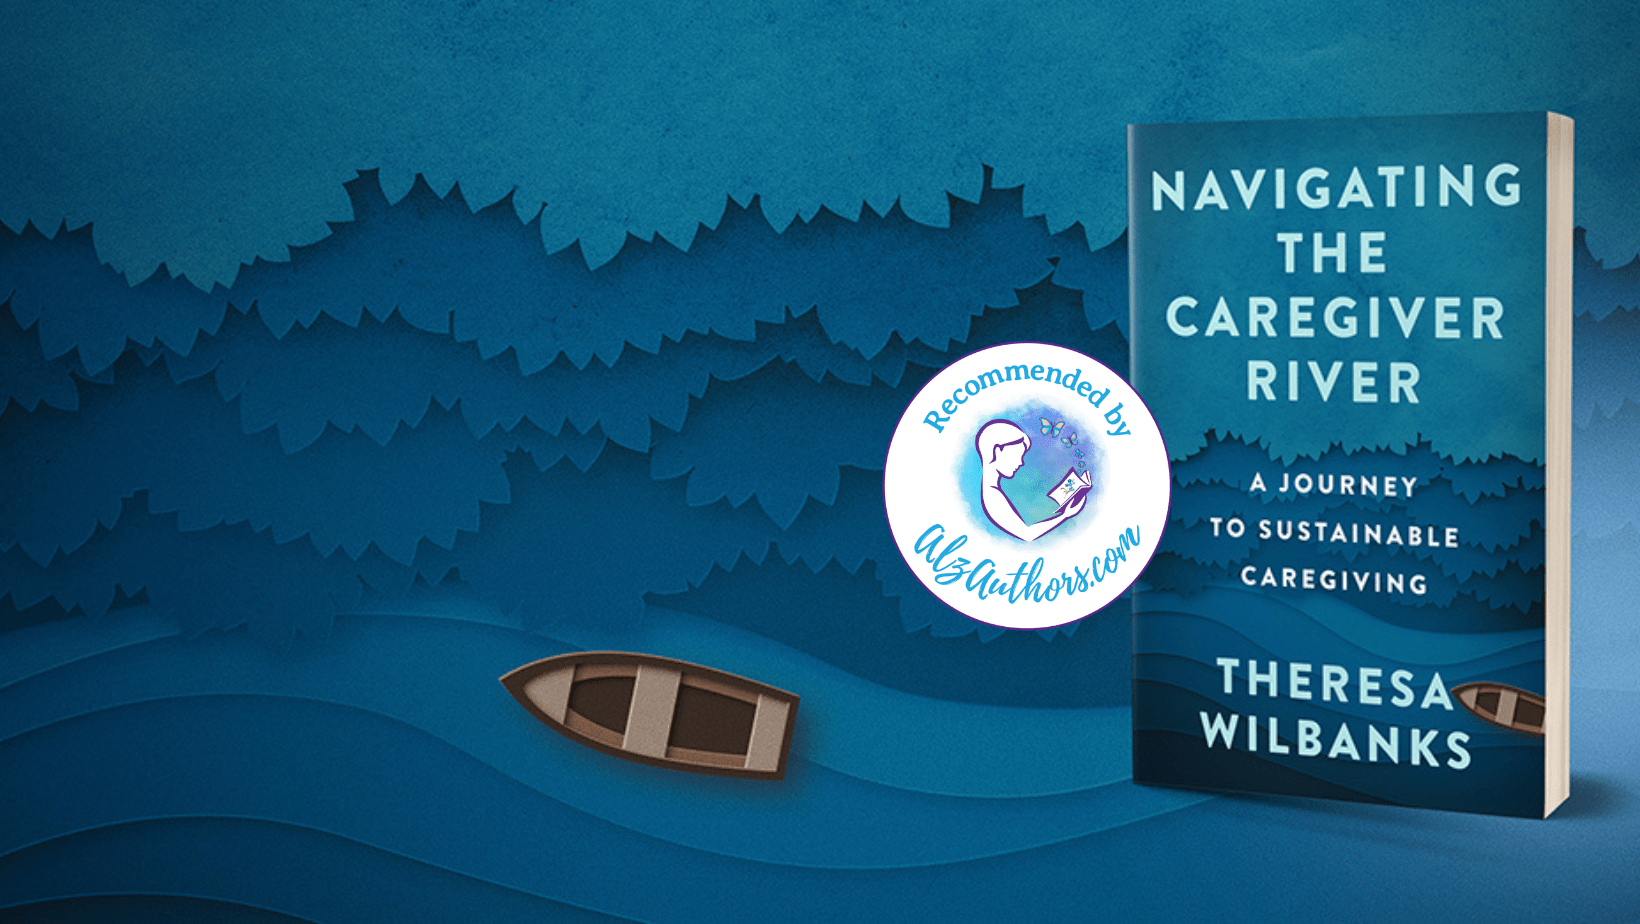 Navigating the Caregiver River: A Journey to Sustainable Caregiving by Theresa Wilbanks 
Recommended by AlzAuthors.com